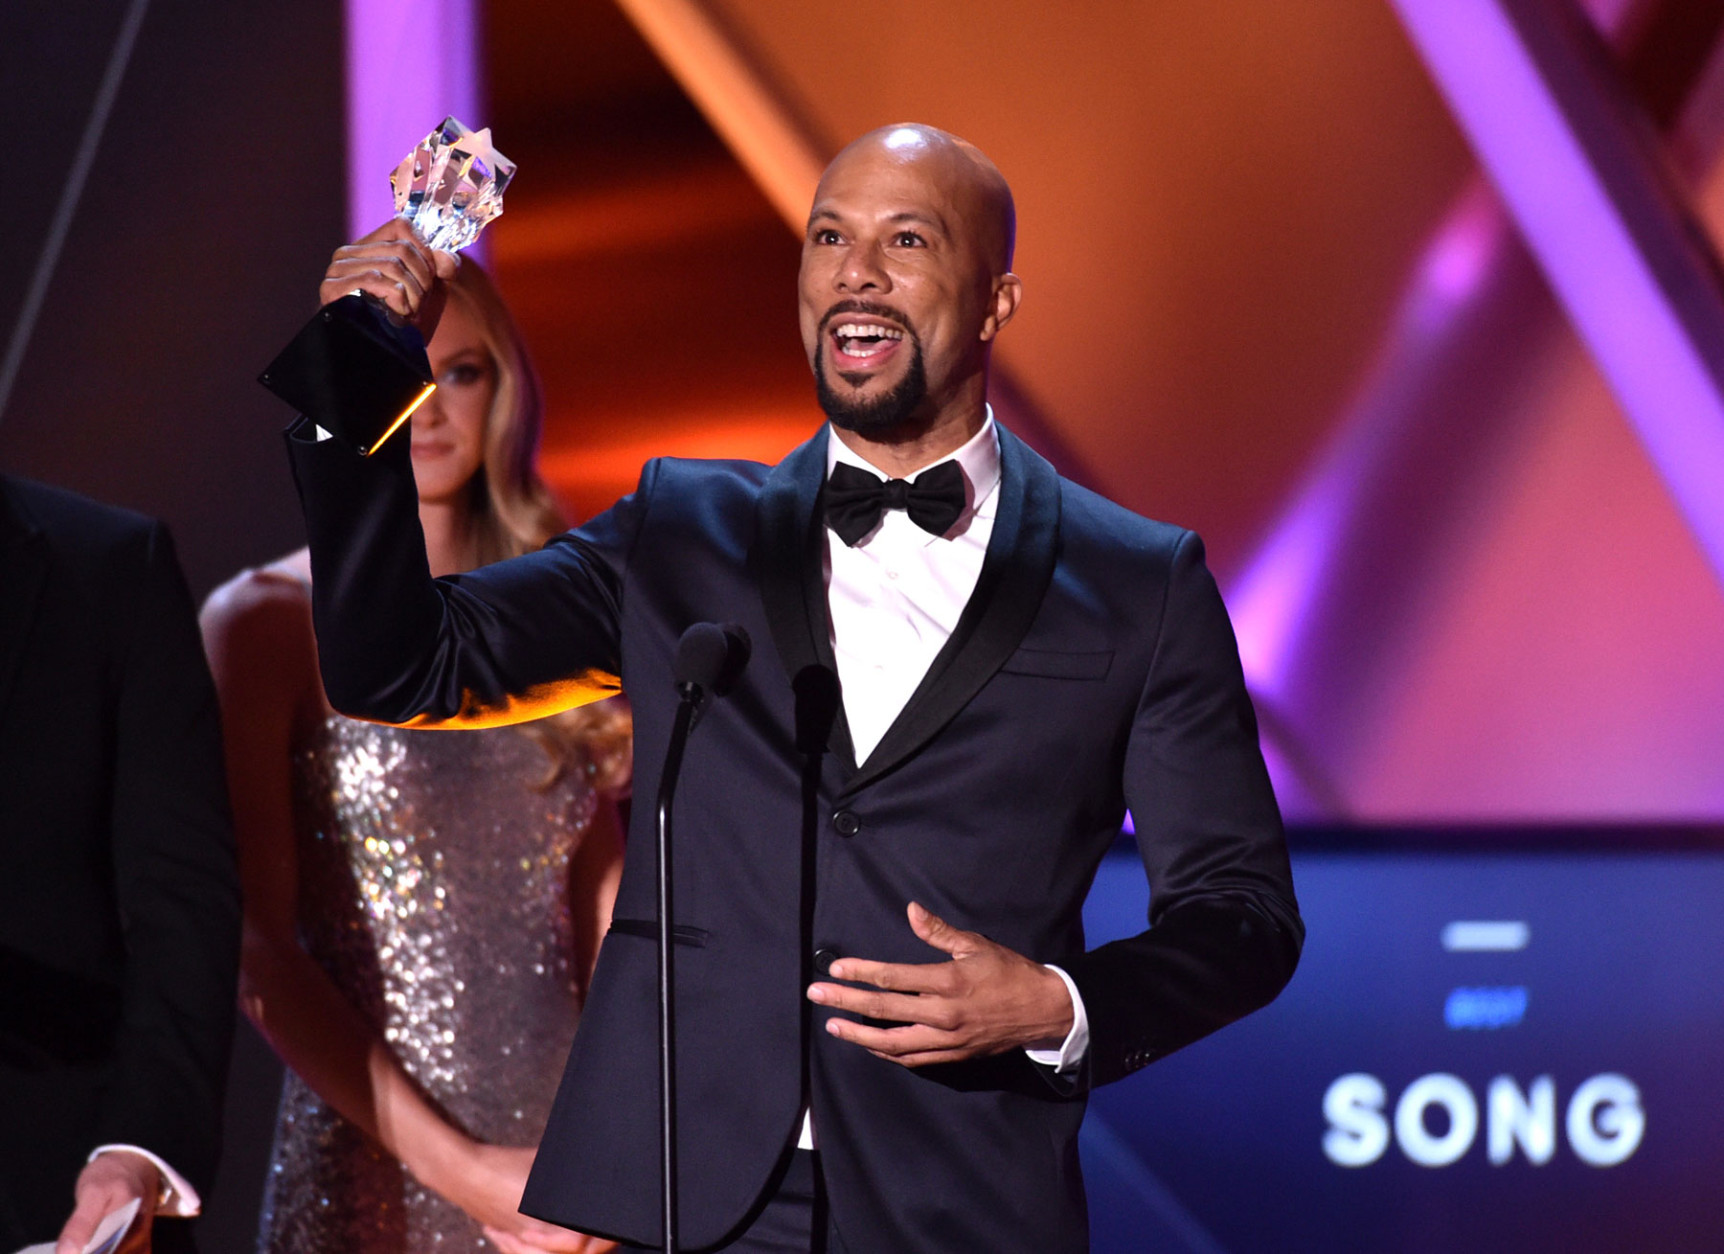 
Common accepts the best song award for the song “Glory” from “Selma” at the 20th annual Critics' Choice Movie Awards at the Hollywood Palladium on Thursday, Jan. 15, 2015, in Los Angeles. (Photo by John Shearer/Invision/AP)